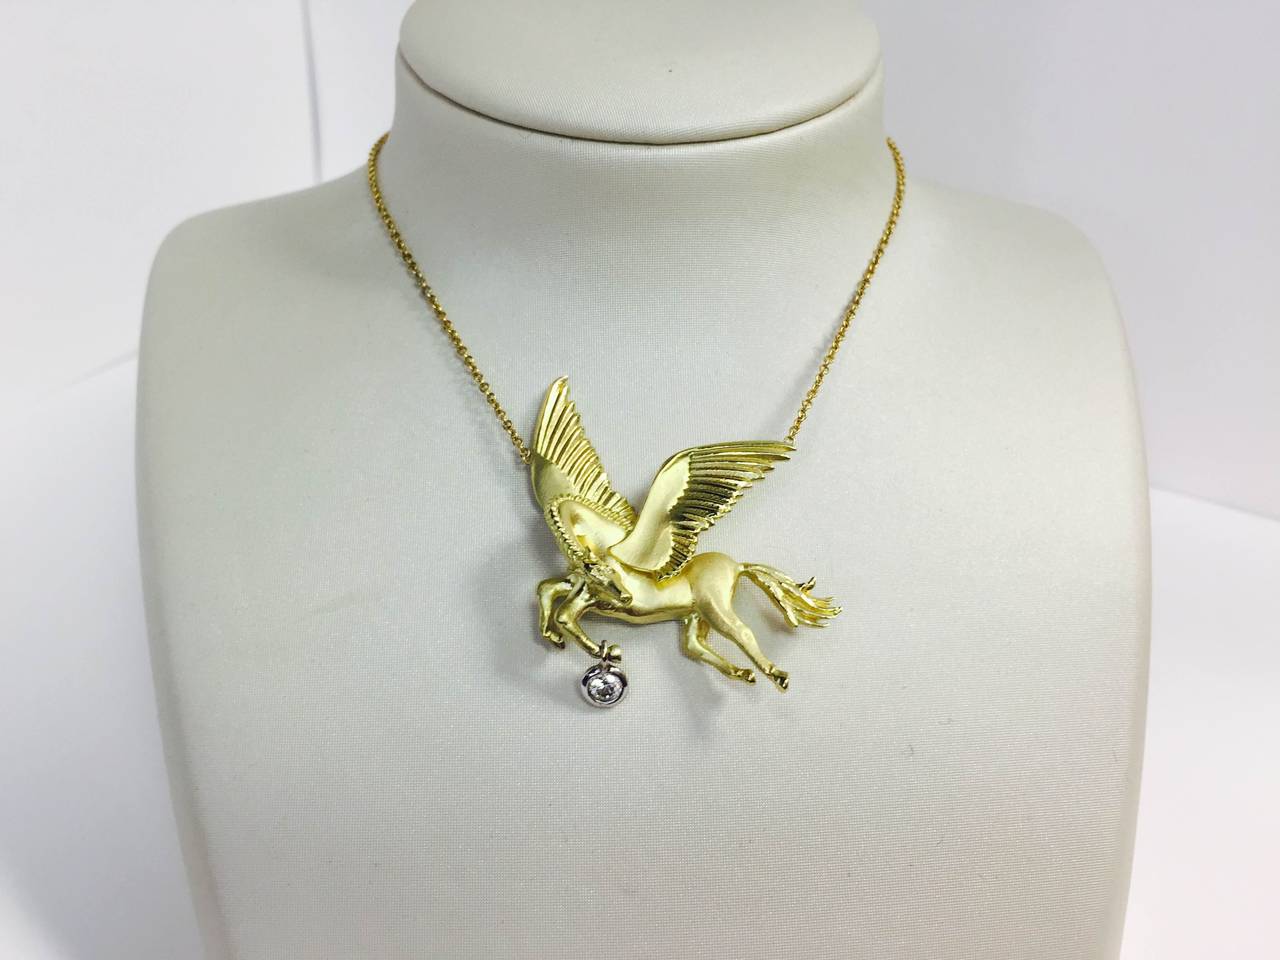 18K Gold Necklace with Pegasus and Diamond Drop

The Pegasus is one of the best known creatures in Greek mythology. 

Comes attached to the 16 inch chain.

0.25 ct G Color, VS Clarity Diamond is bezel set, hanging from the leg of the Pegasus.